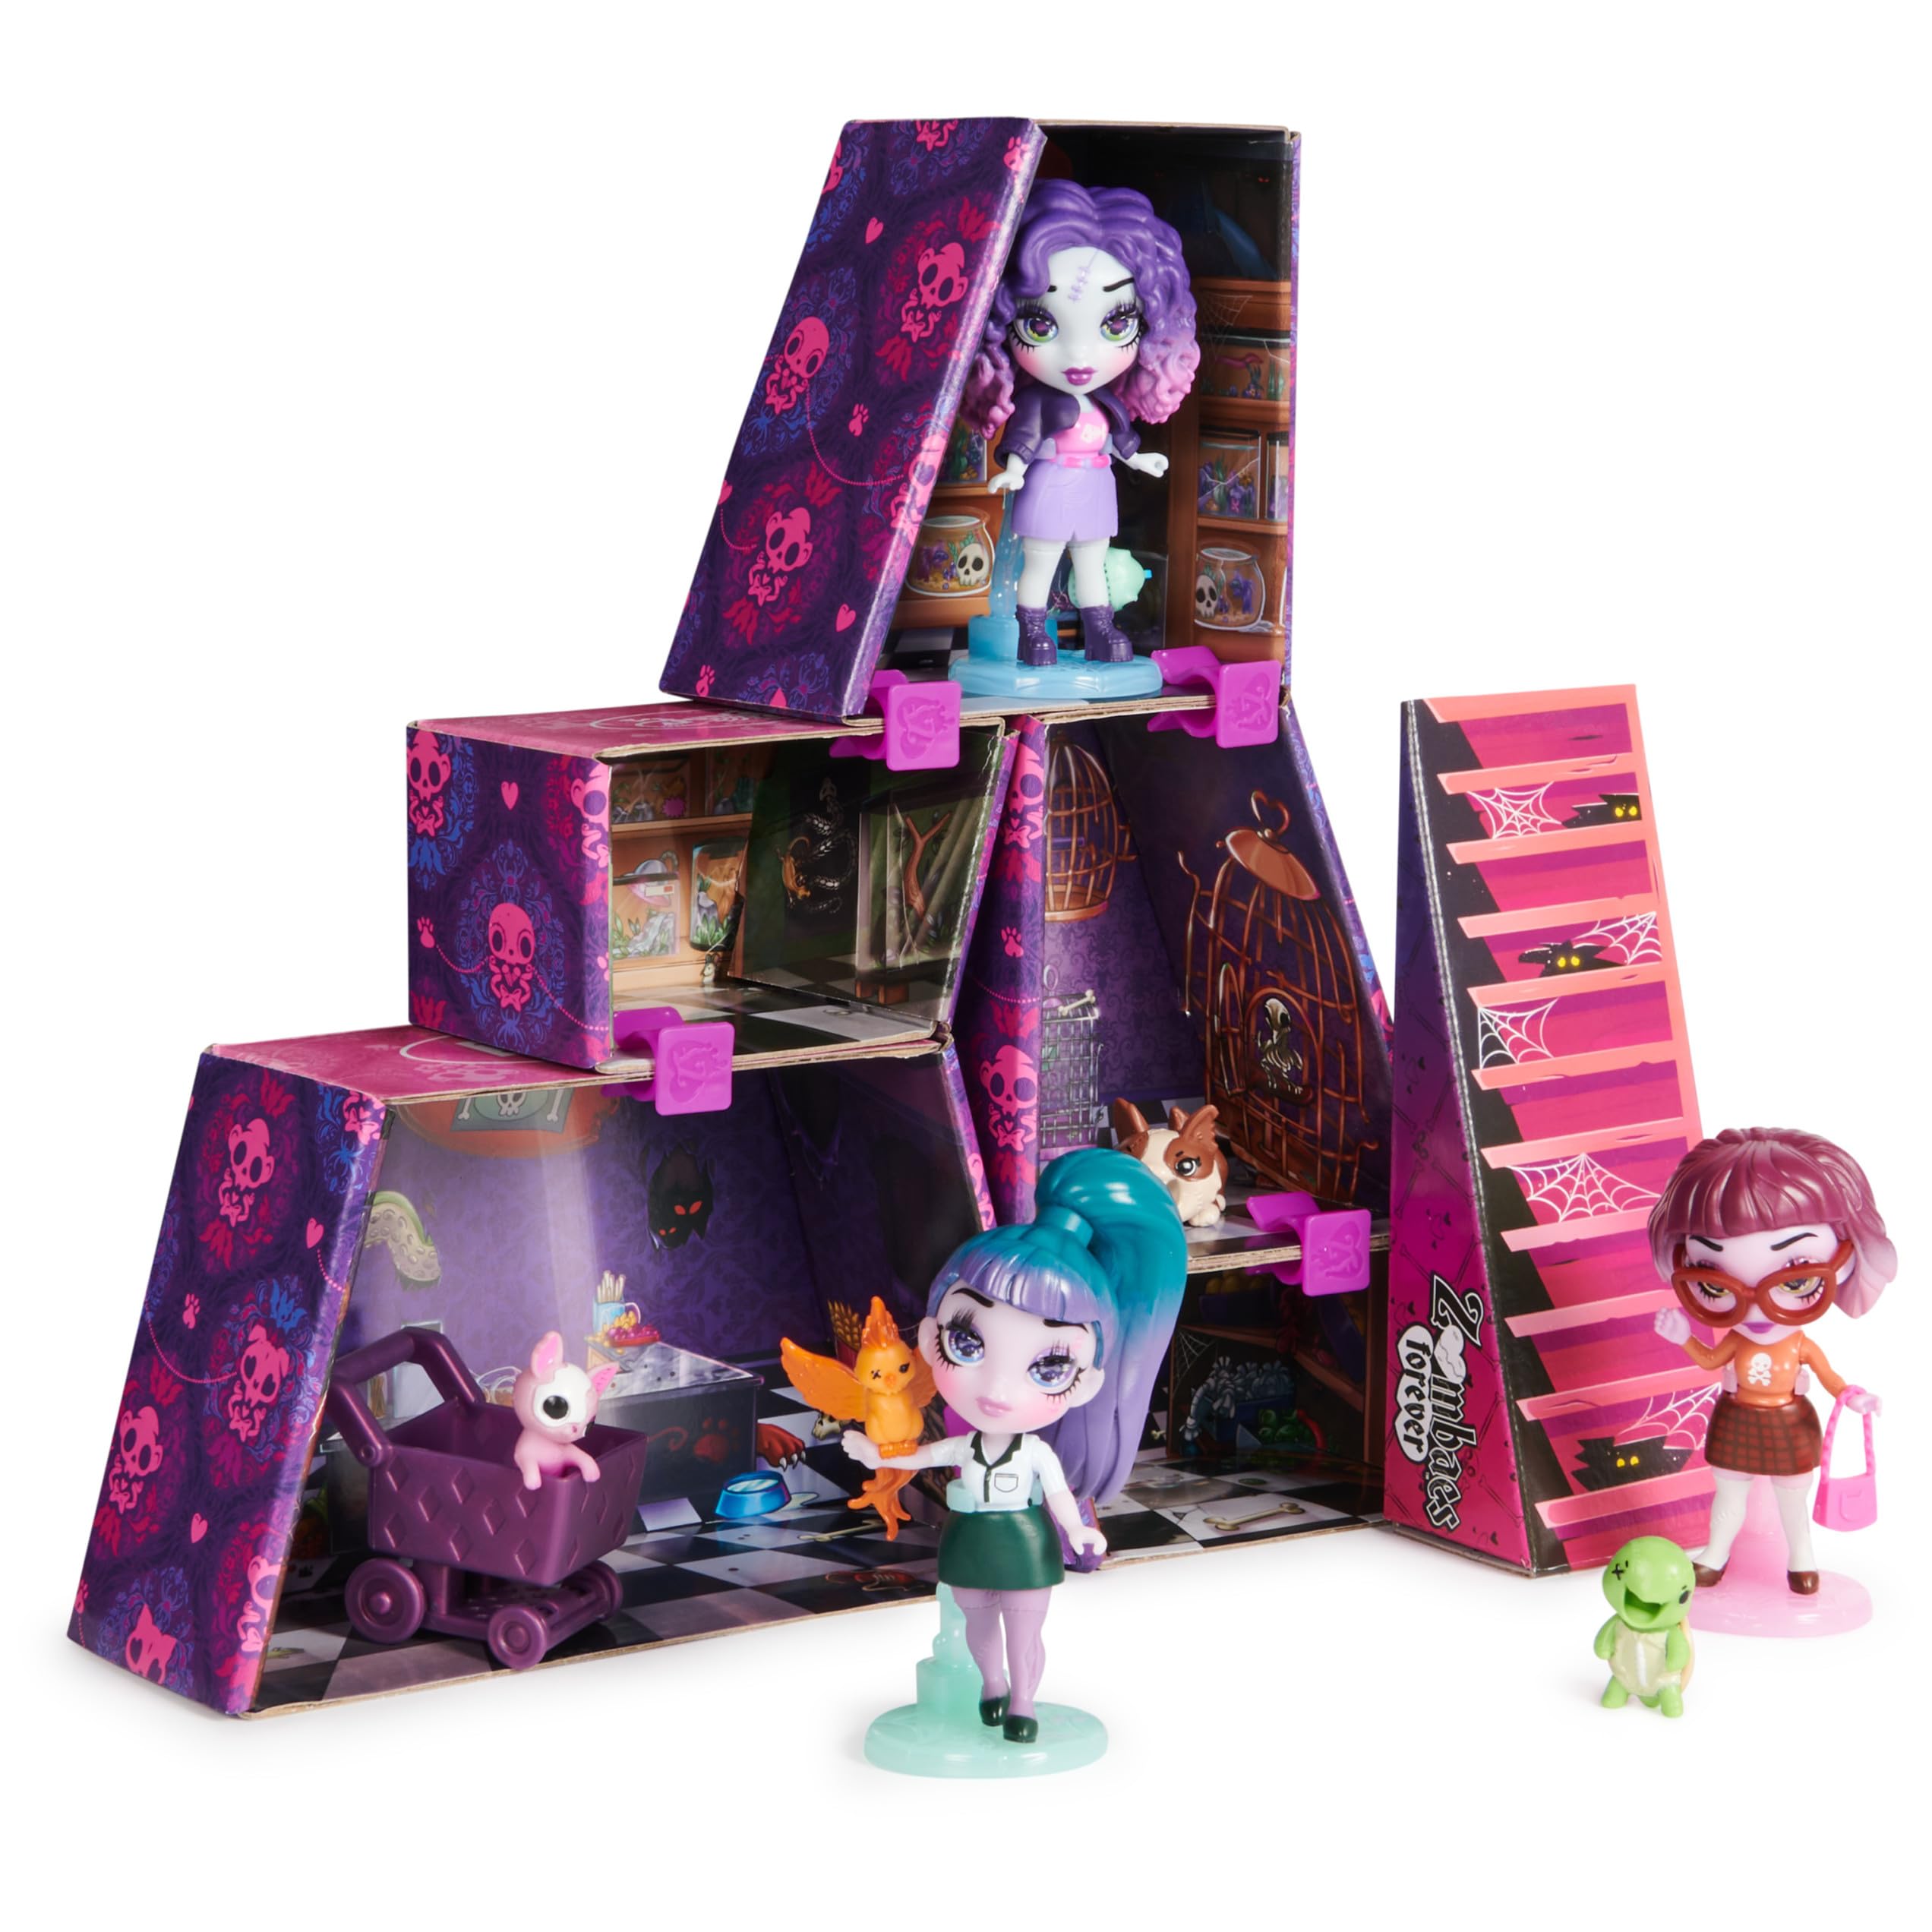 Zombaes Forever, Wild Vibes, Abandoned Pet Shop Customizable Doll House Playset, 3 Exclusive Zombie Dolls & Accessories, 5 Pets, Kids Toys for Girls